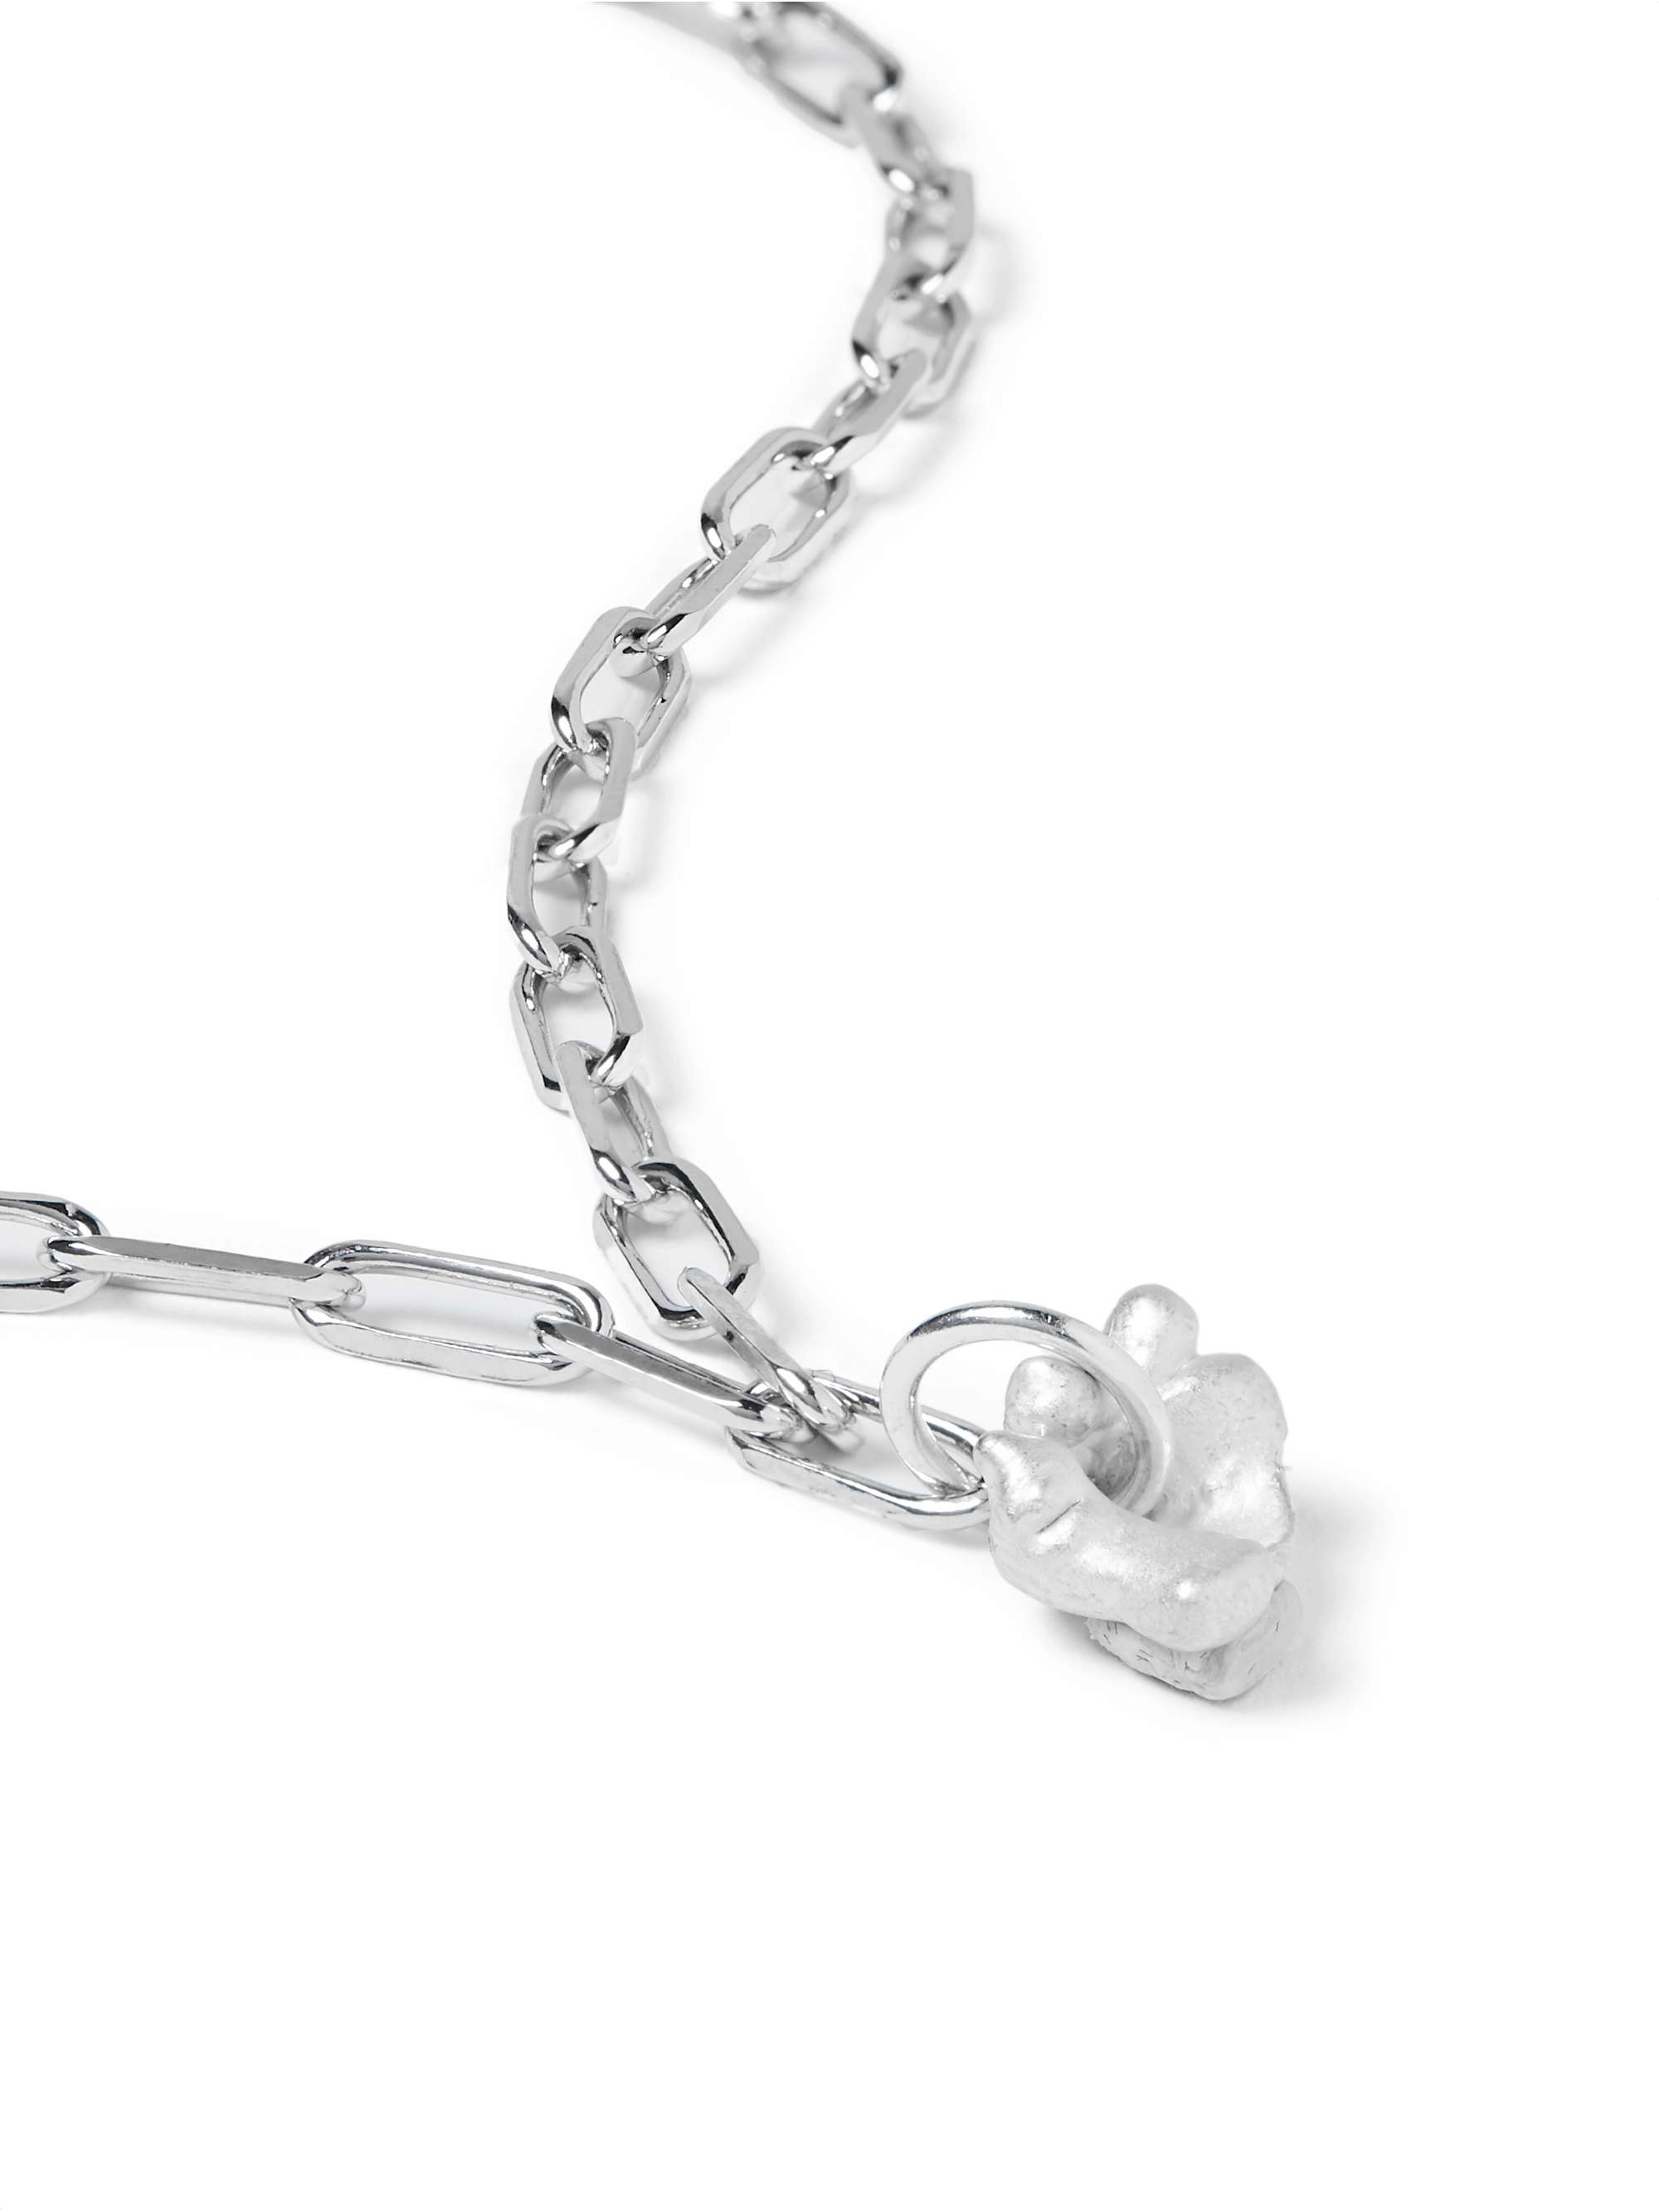 ALICE MADE THIS Bardo Rhodium-Plated Chain Necklace